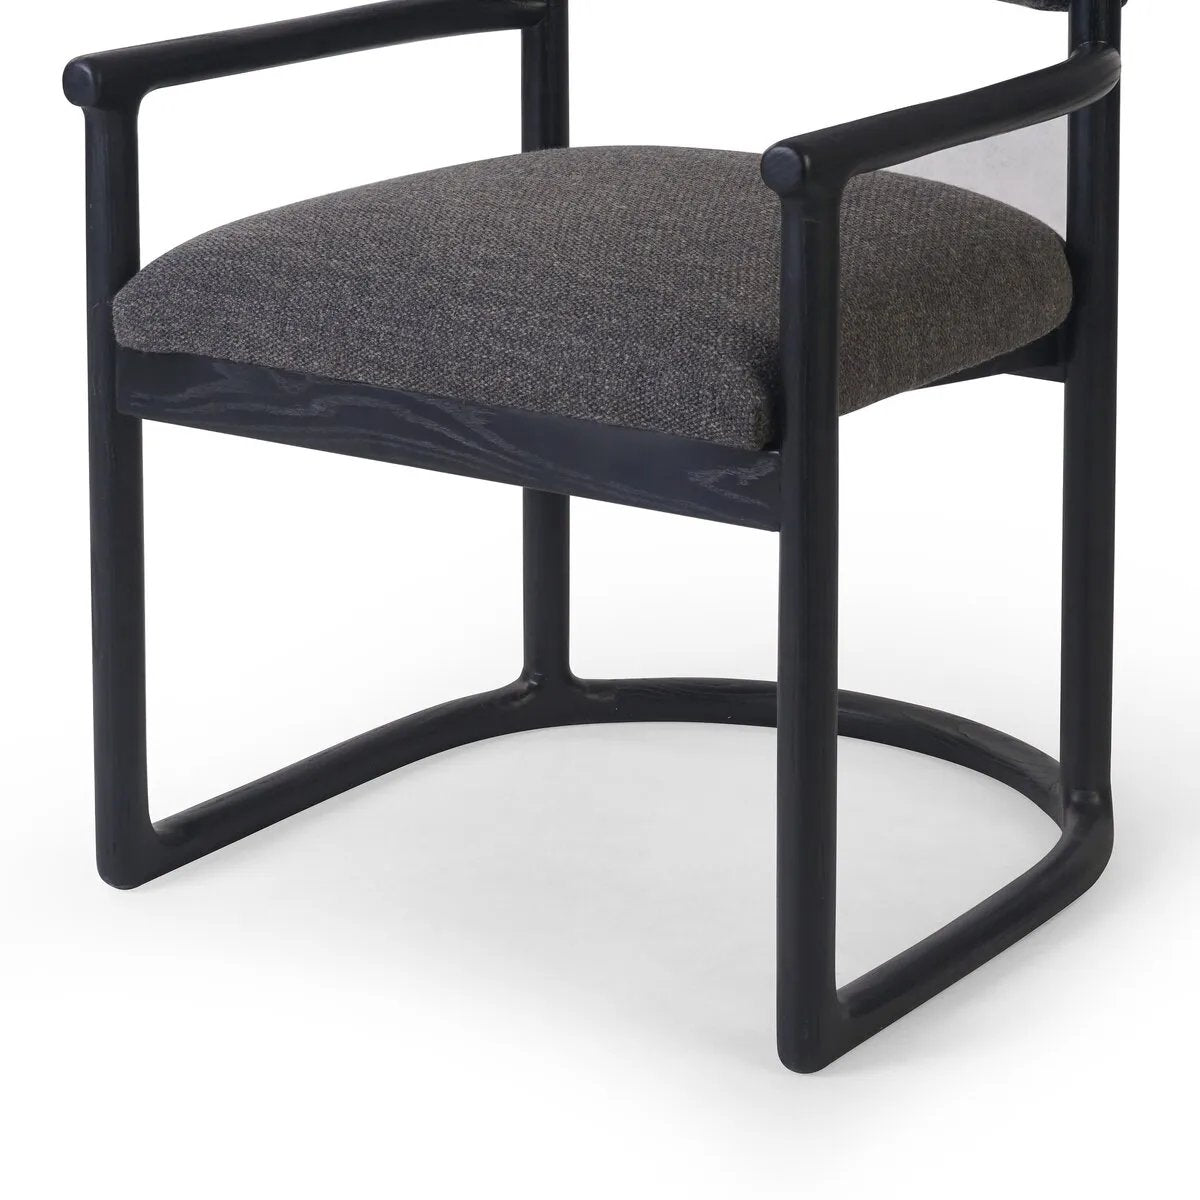 This Clarice Thames Ash Dining Chair is a versatile and stylish addition to your dining space. Its high-quality construction and sleek design provide comfort and elegance Amethyst Home provides interior design, new home construction design consulting, vintage area rugs, and lighting in the Boston metro area.